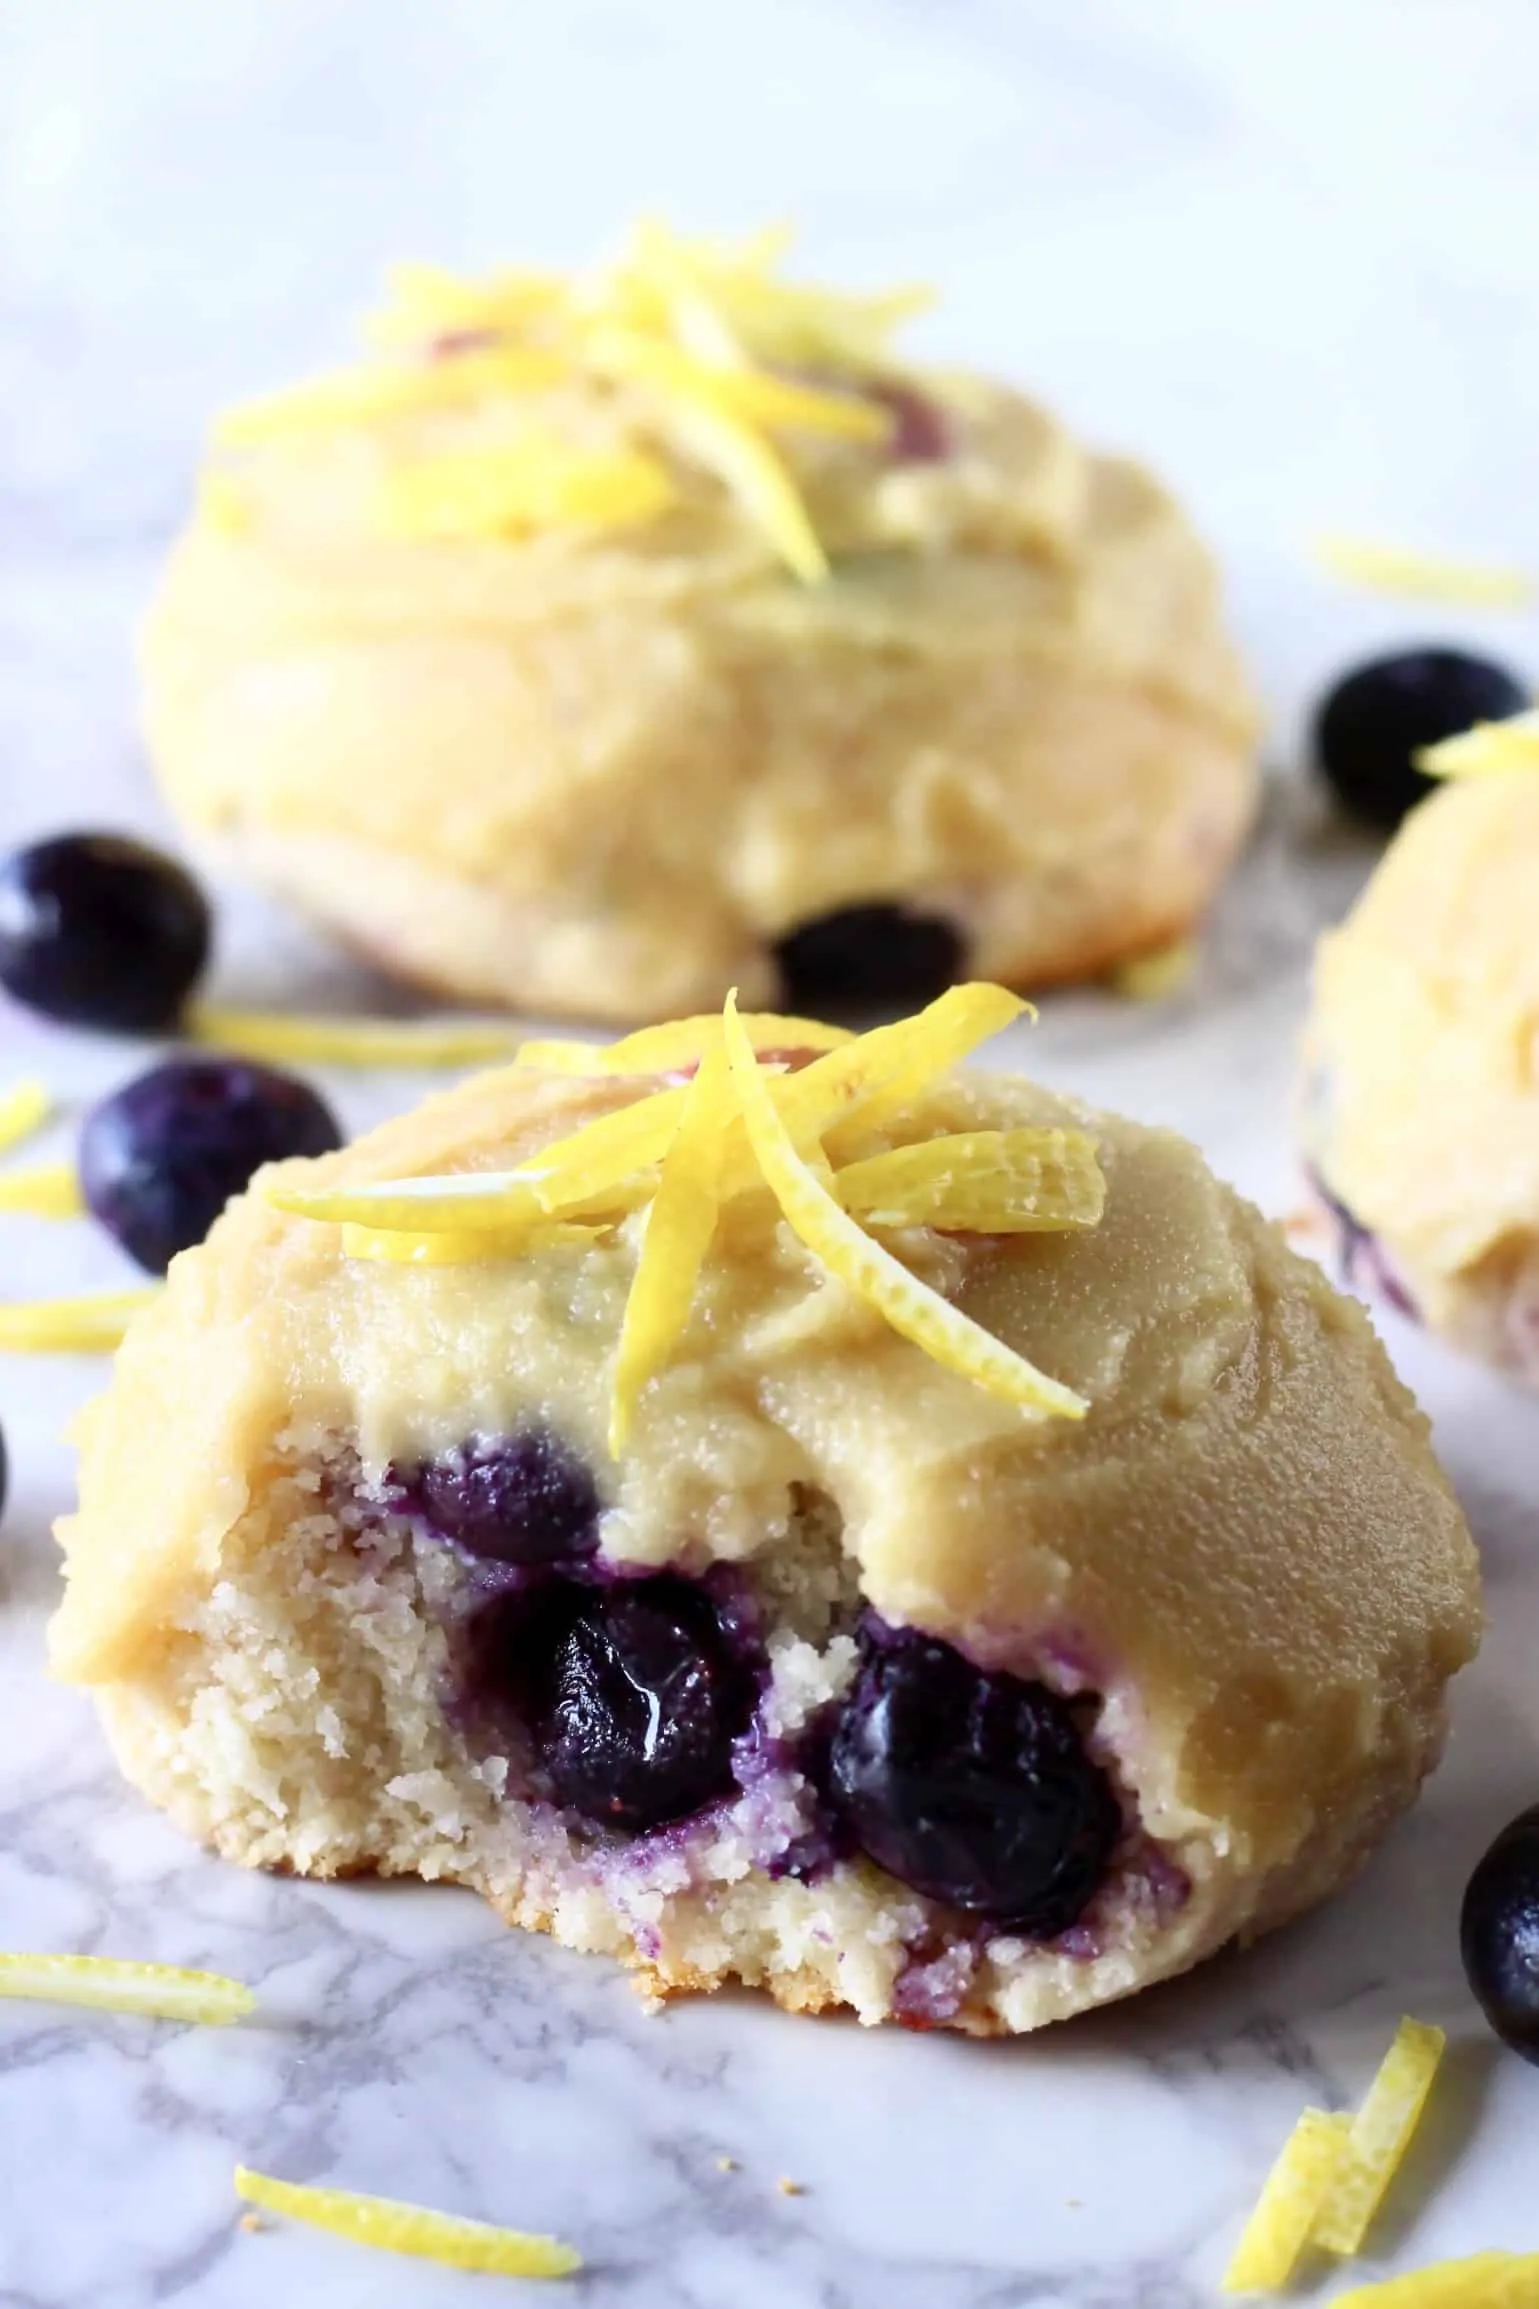 Three lemon blueberry cookies with frosting and a bite taken out of one